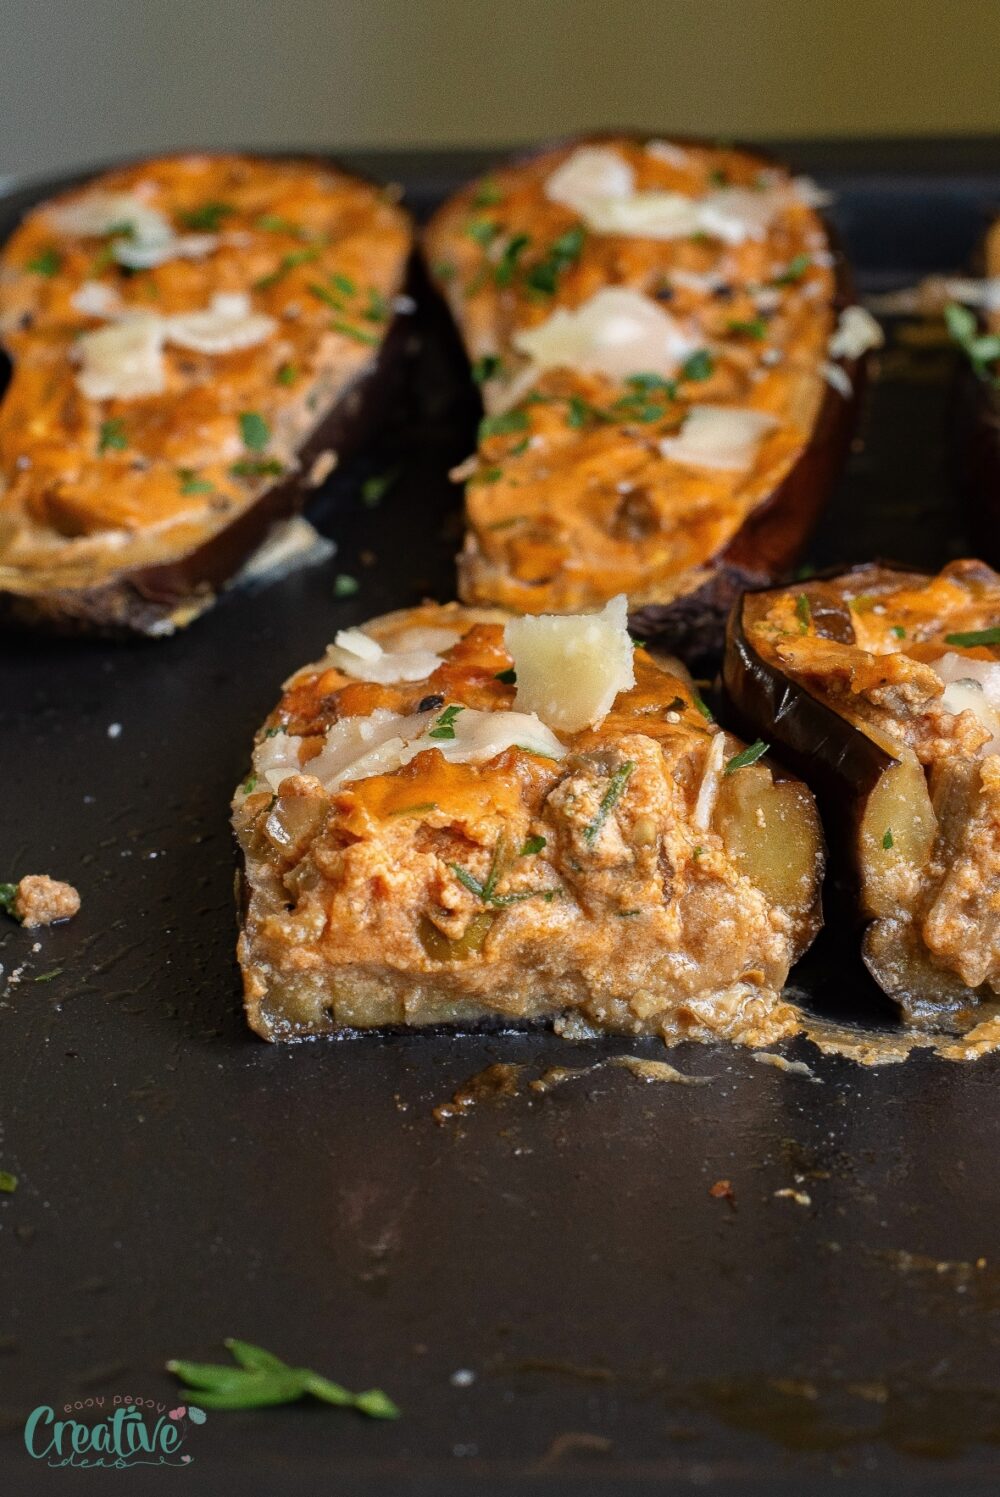 Delicious vegetarian stuffed aubergine filled with cheese, veggies, spices - a quick, nourishing, and healthy delight!